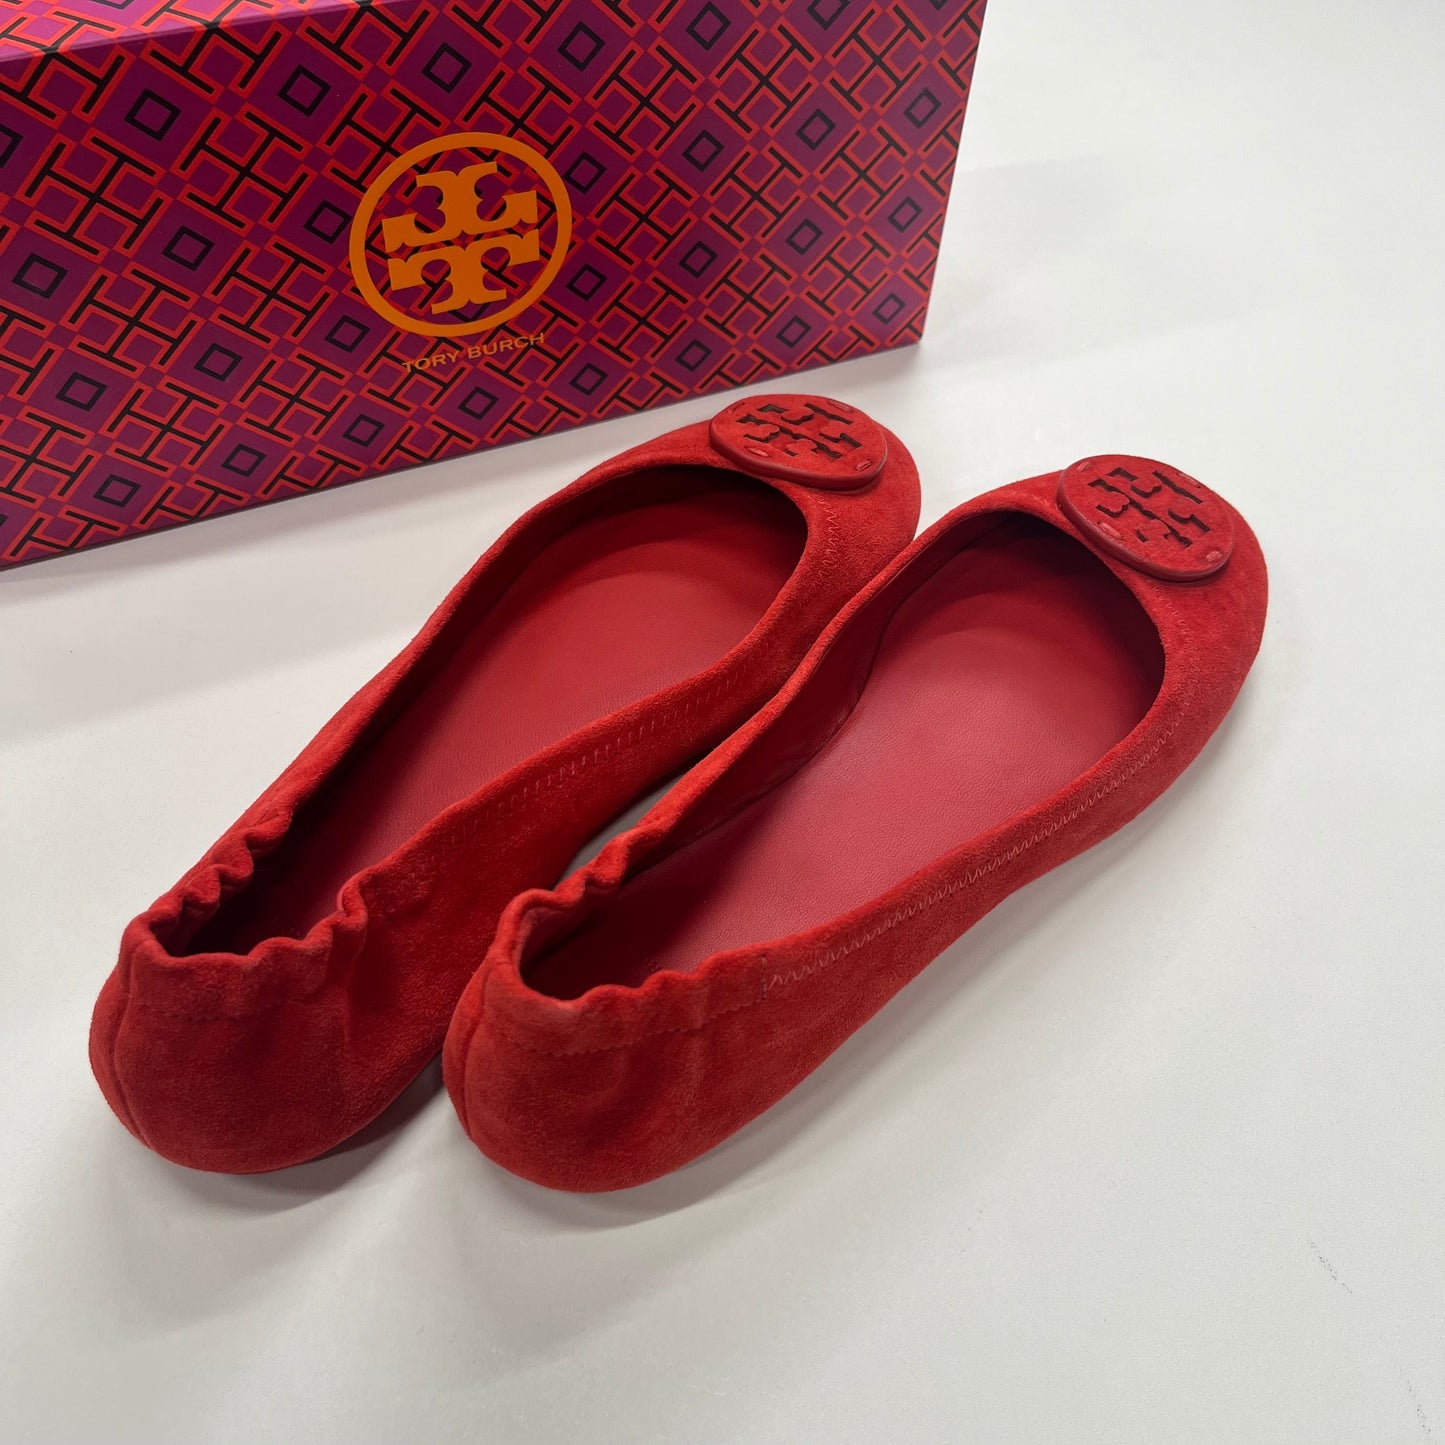 Red Shoes Flats Ballet Tory Burch, Size 9